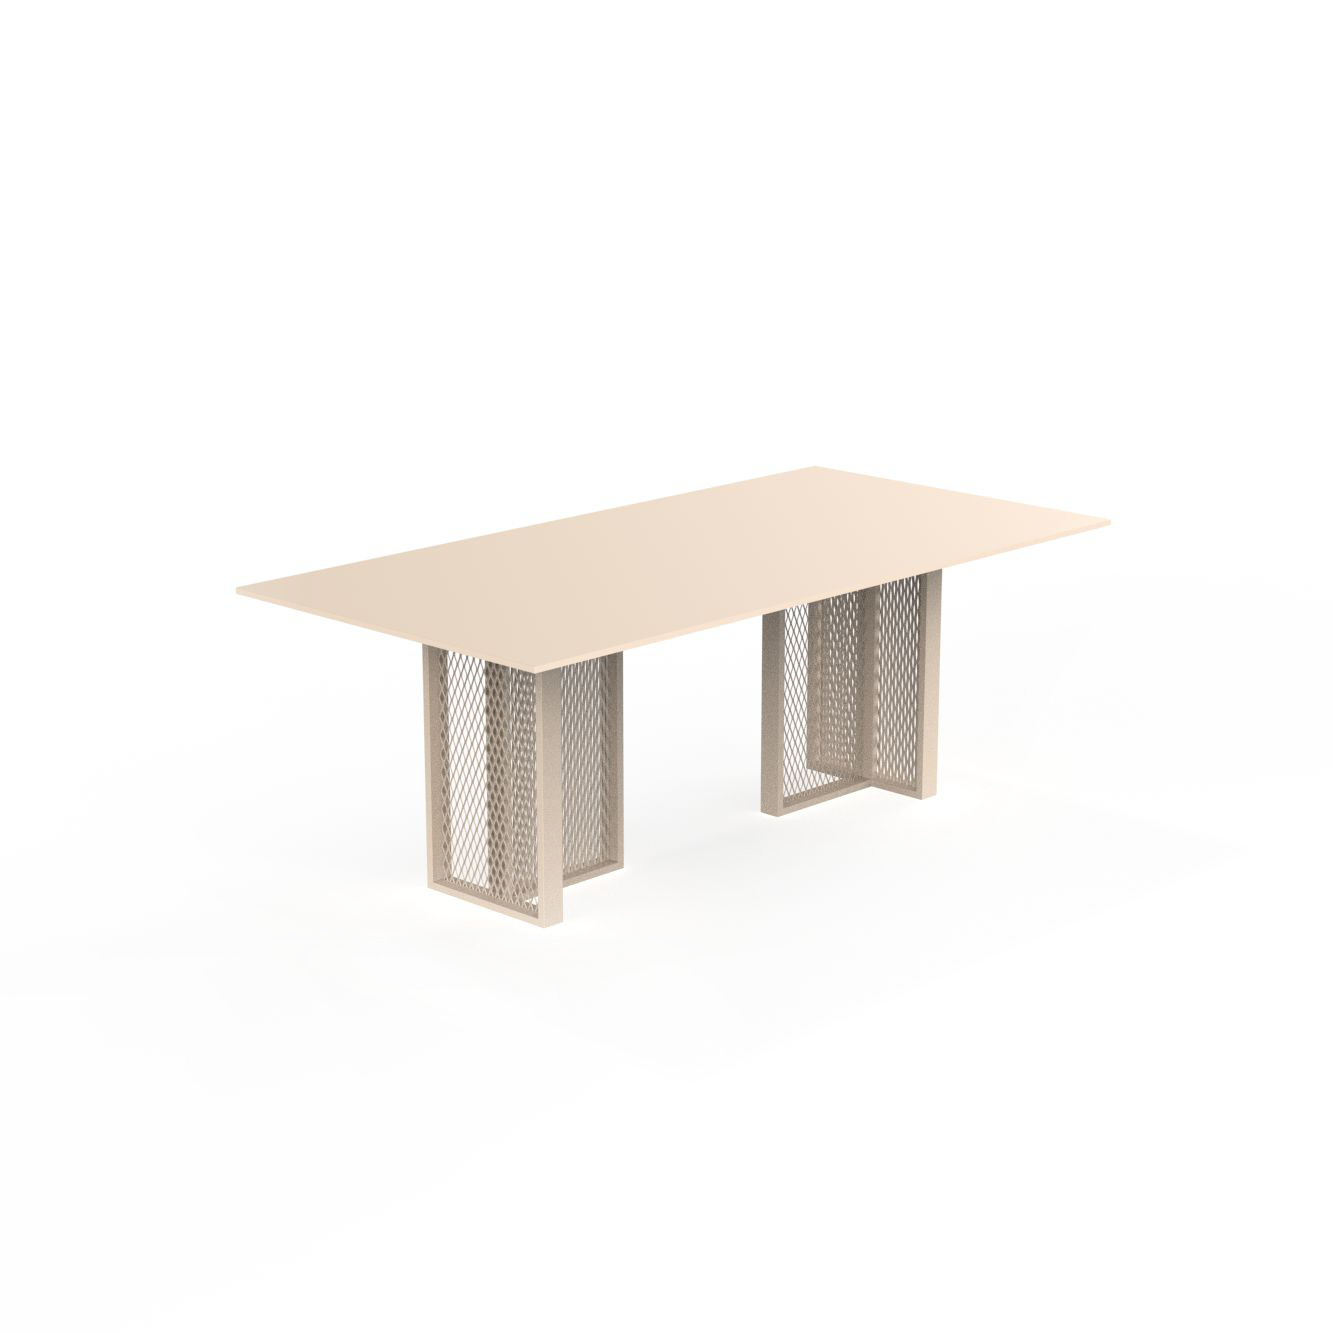 THE FACTORY DINING TABLE 300x120